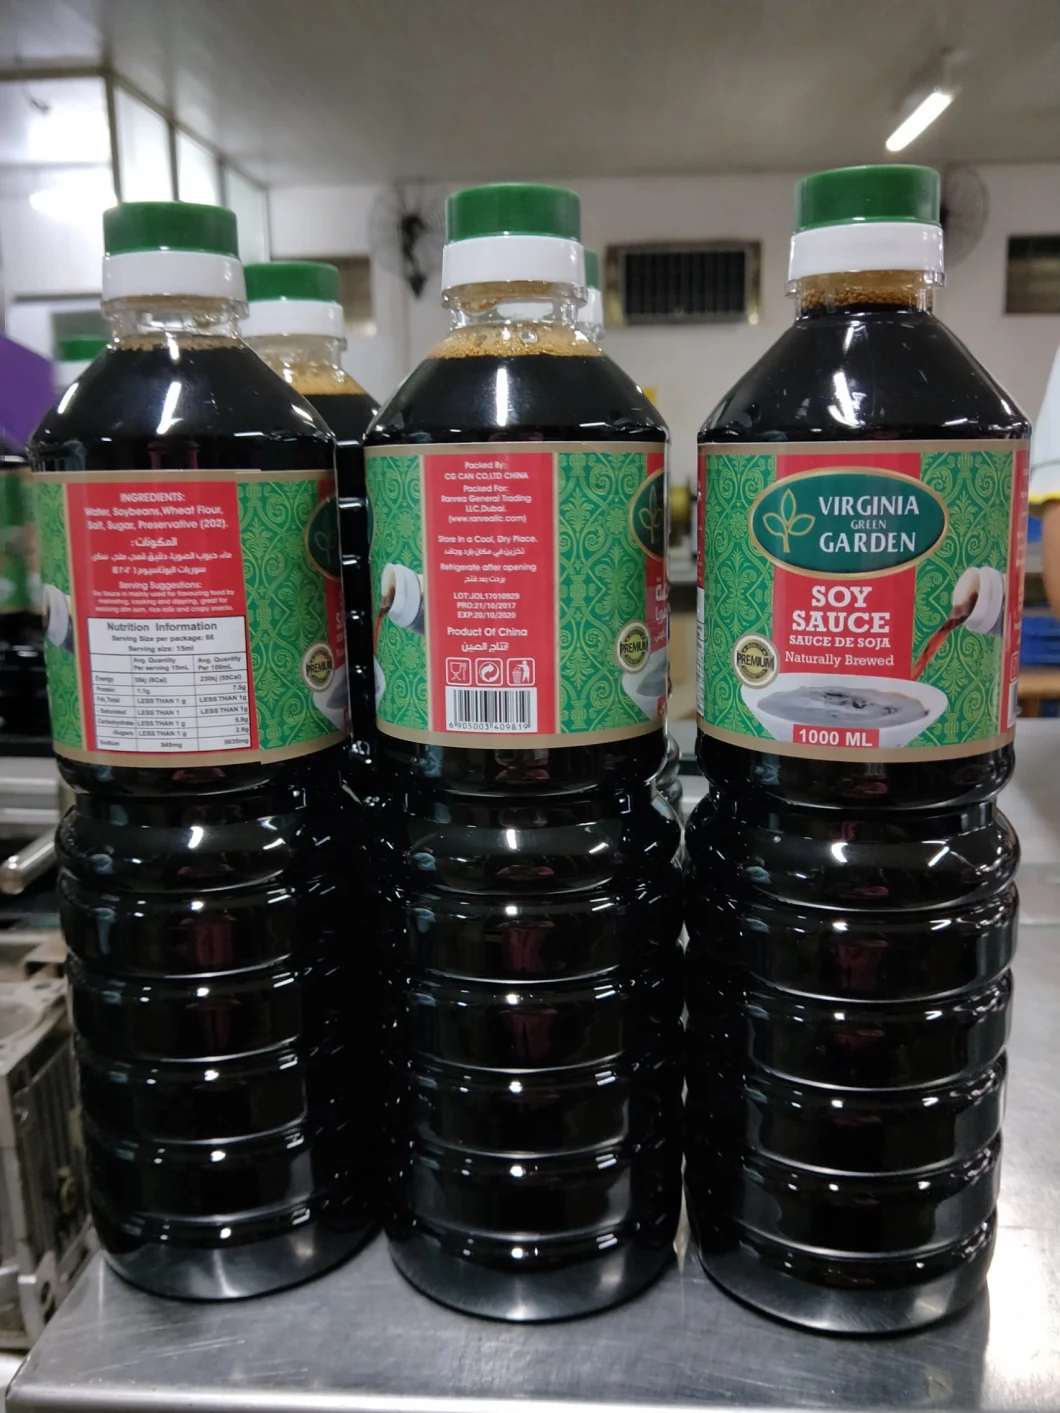 Factory Wholesale Superior Dark/Light Soy Sauce From Natual Brewed